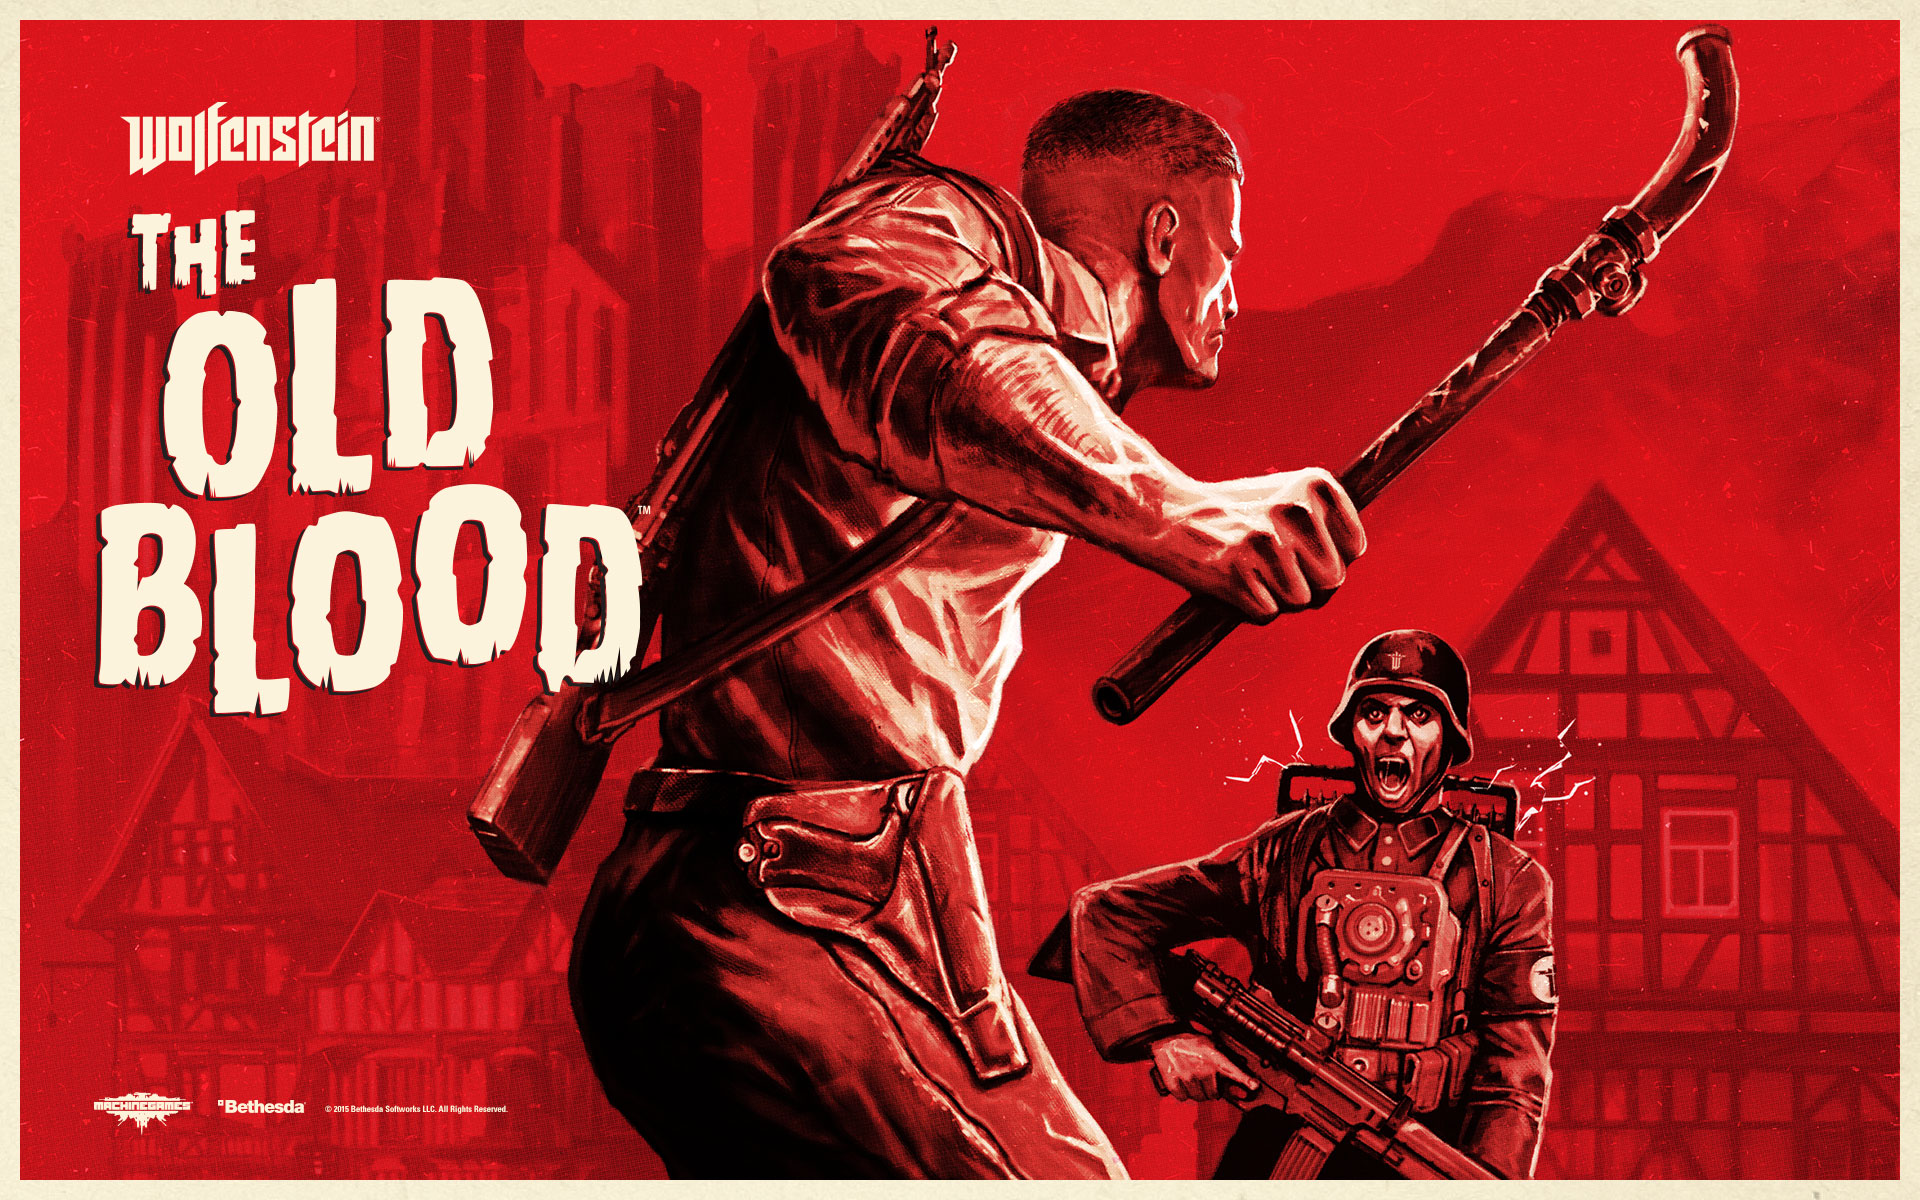 Wolfenstein: The Old Blood Backgrounds, Compatible - PC, Mobile, Gadgets| 1920x1200 px